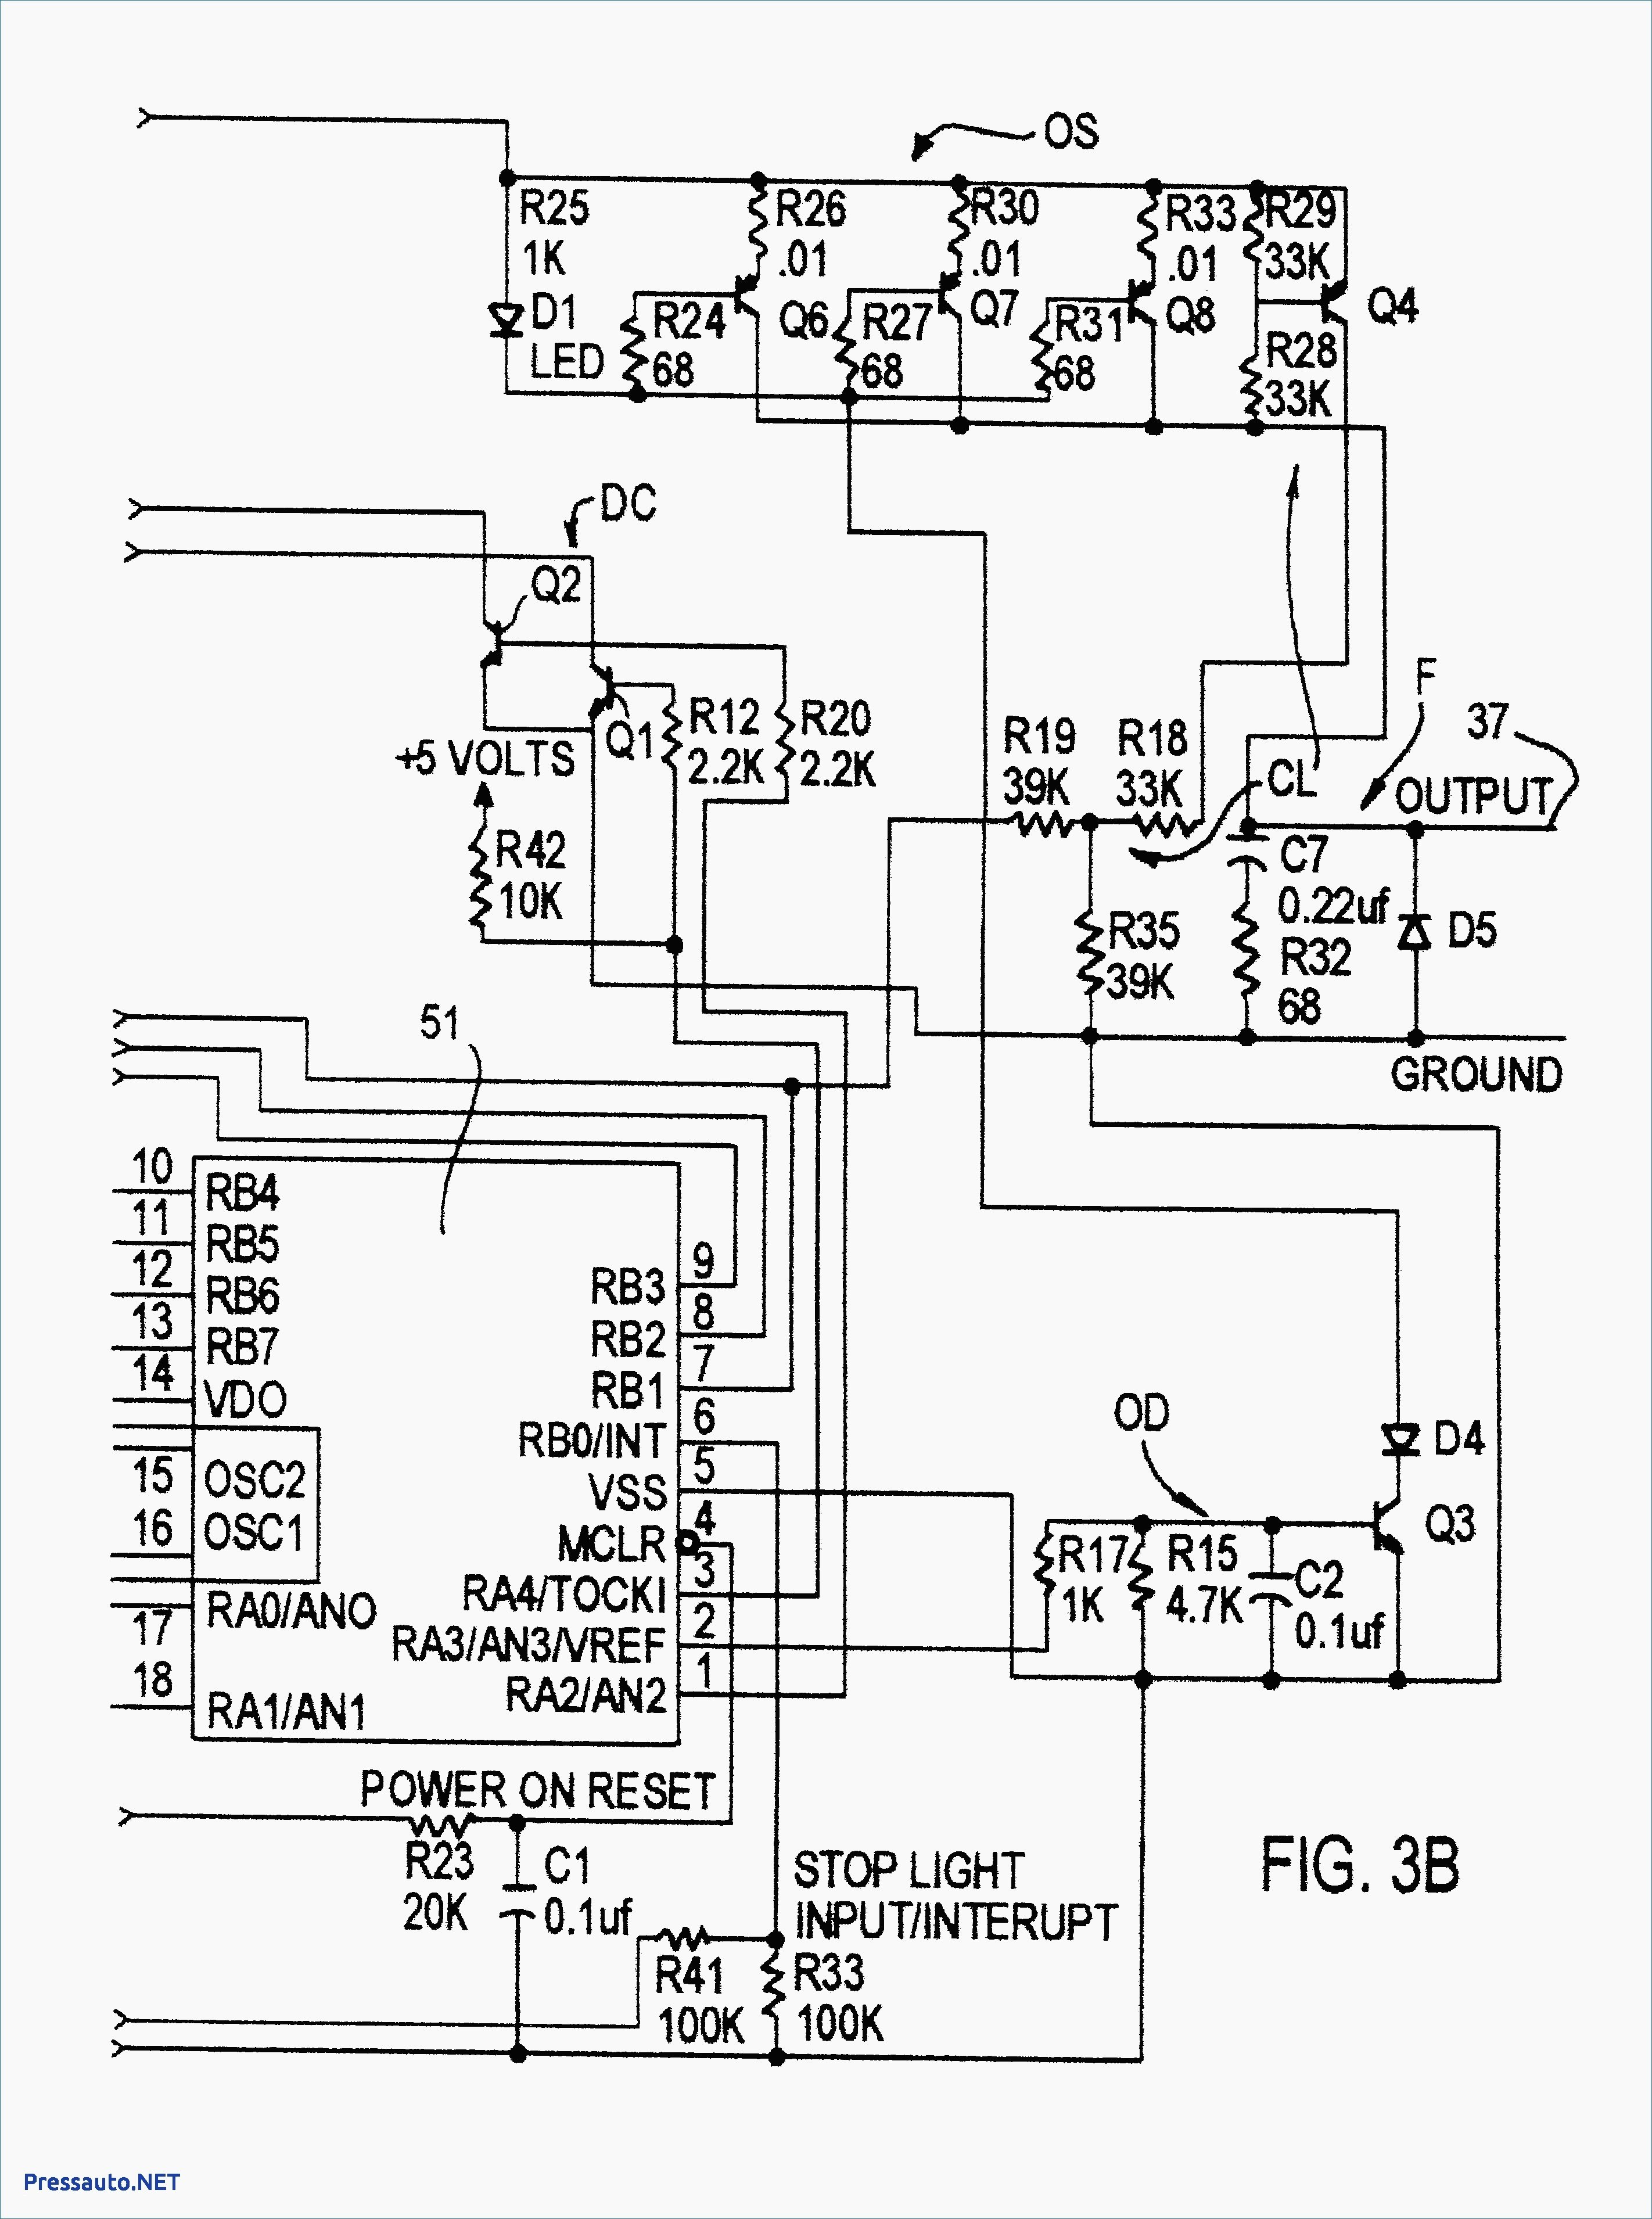 Boat Trailer Wiring Diagram New Harbor Freight Boat Trailer Harbor Freight Trailer Wiring Diagram